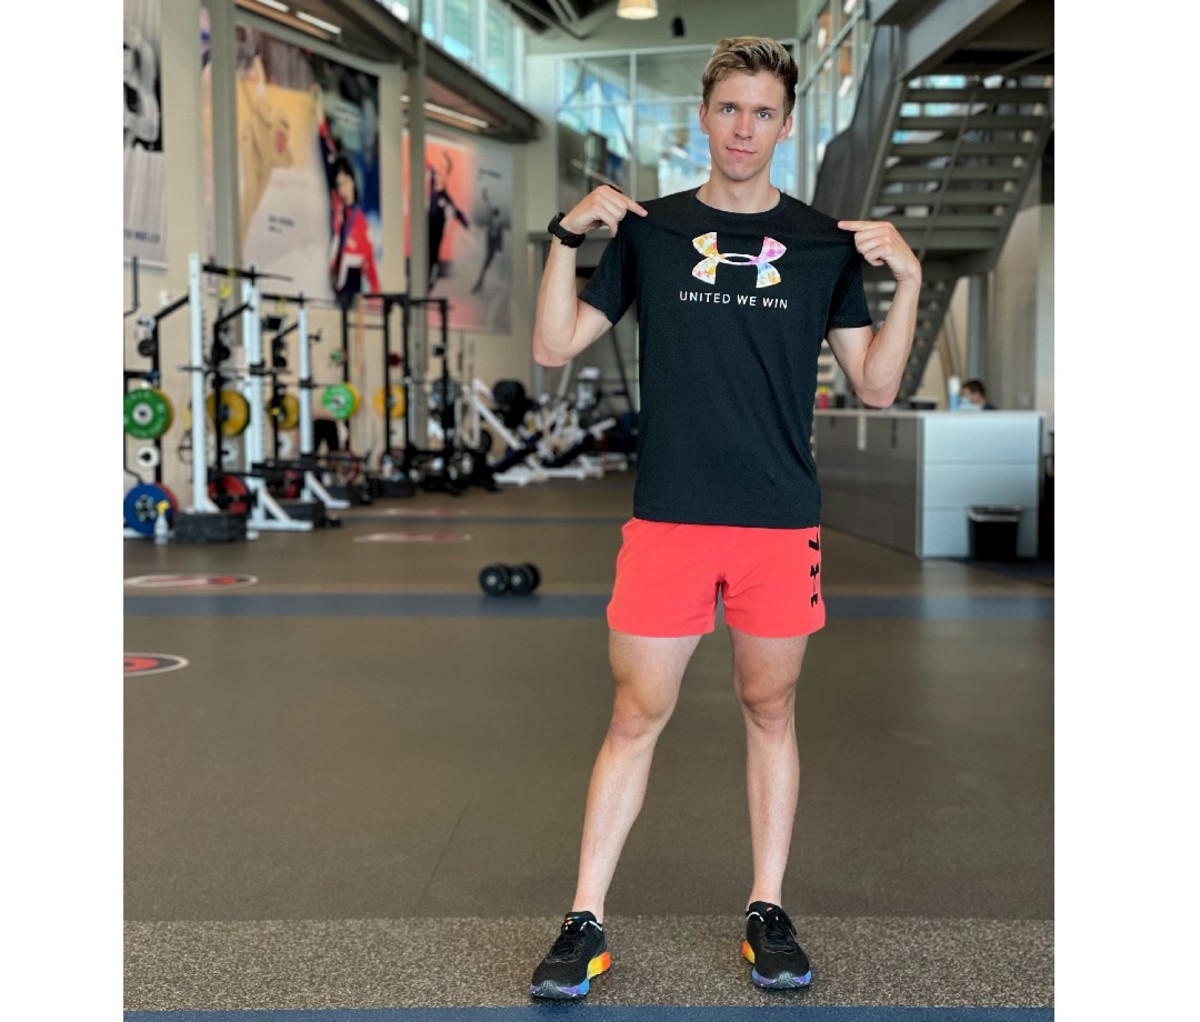 Team USA speed skater Conor McDermott-Mostowy at the gym